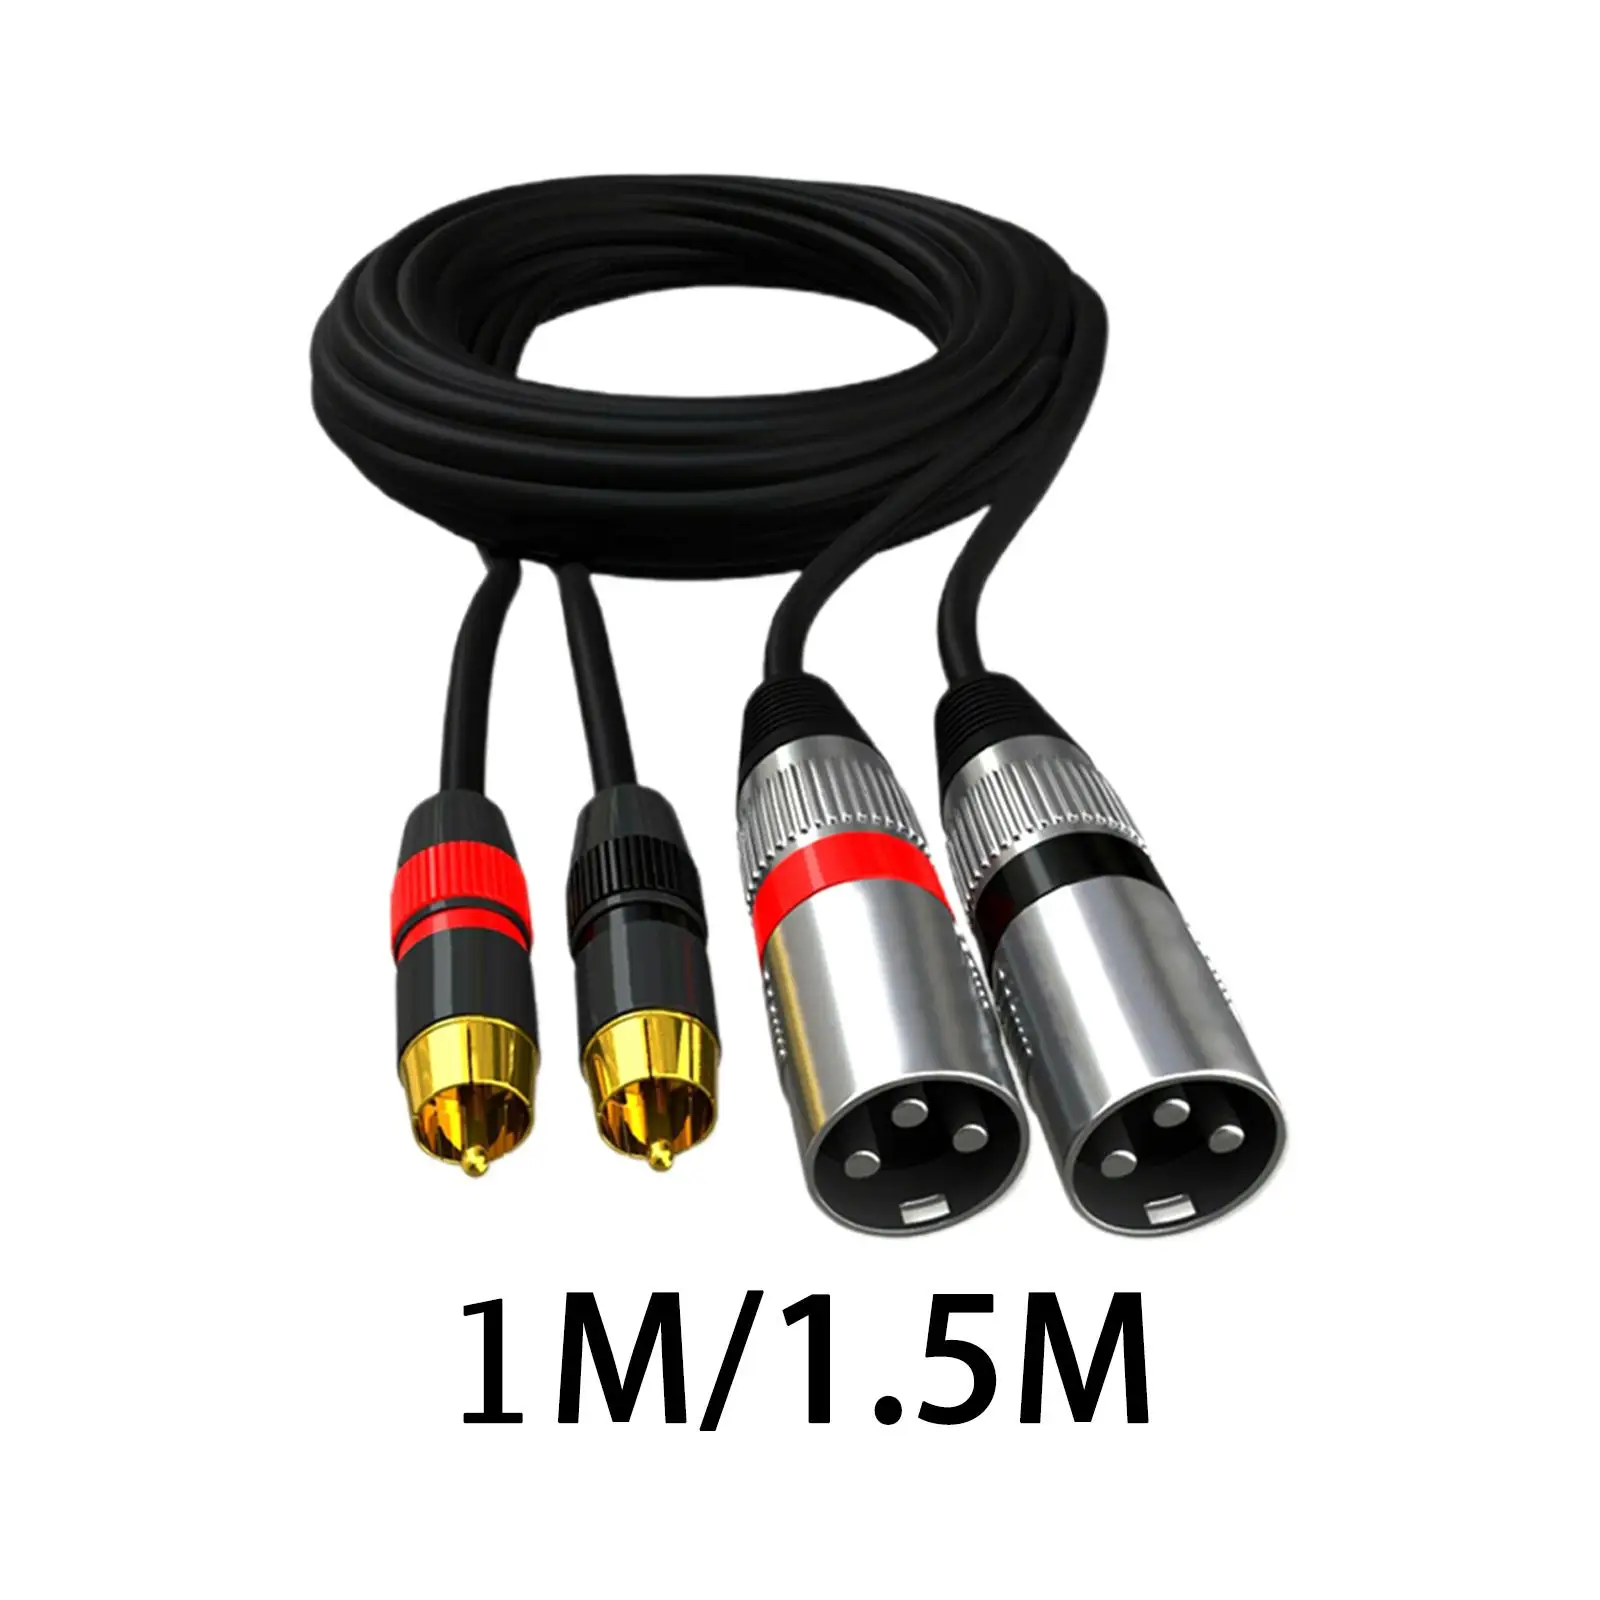 

RCA to XLR Cable HiFi Stereo Audio Connection Interconnect Cord Wire Dual RCA Male to Dual XLR Male Cable for Microphone Mixer